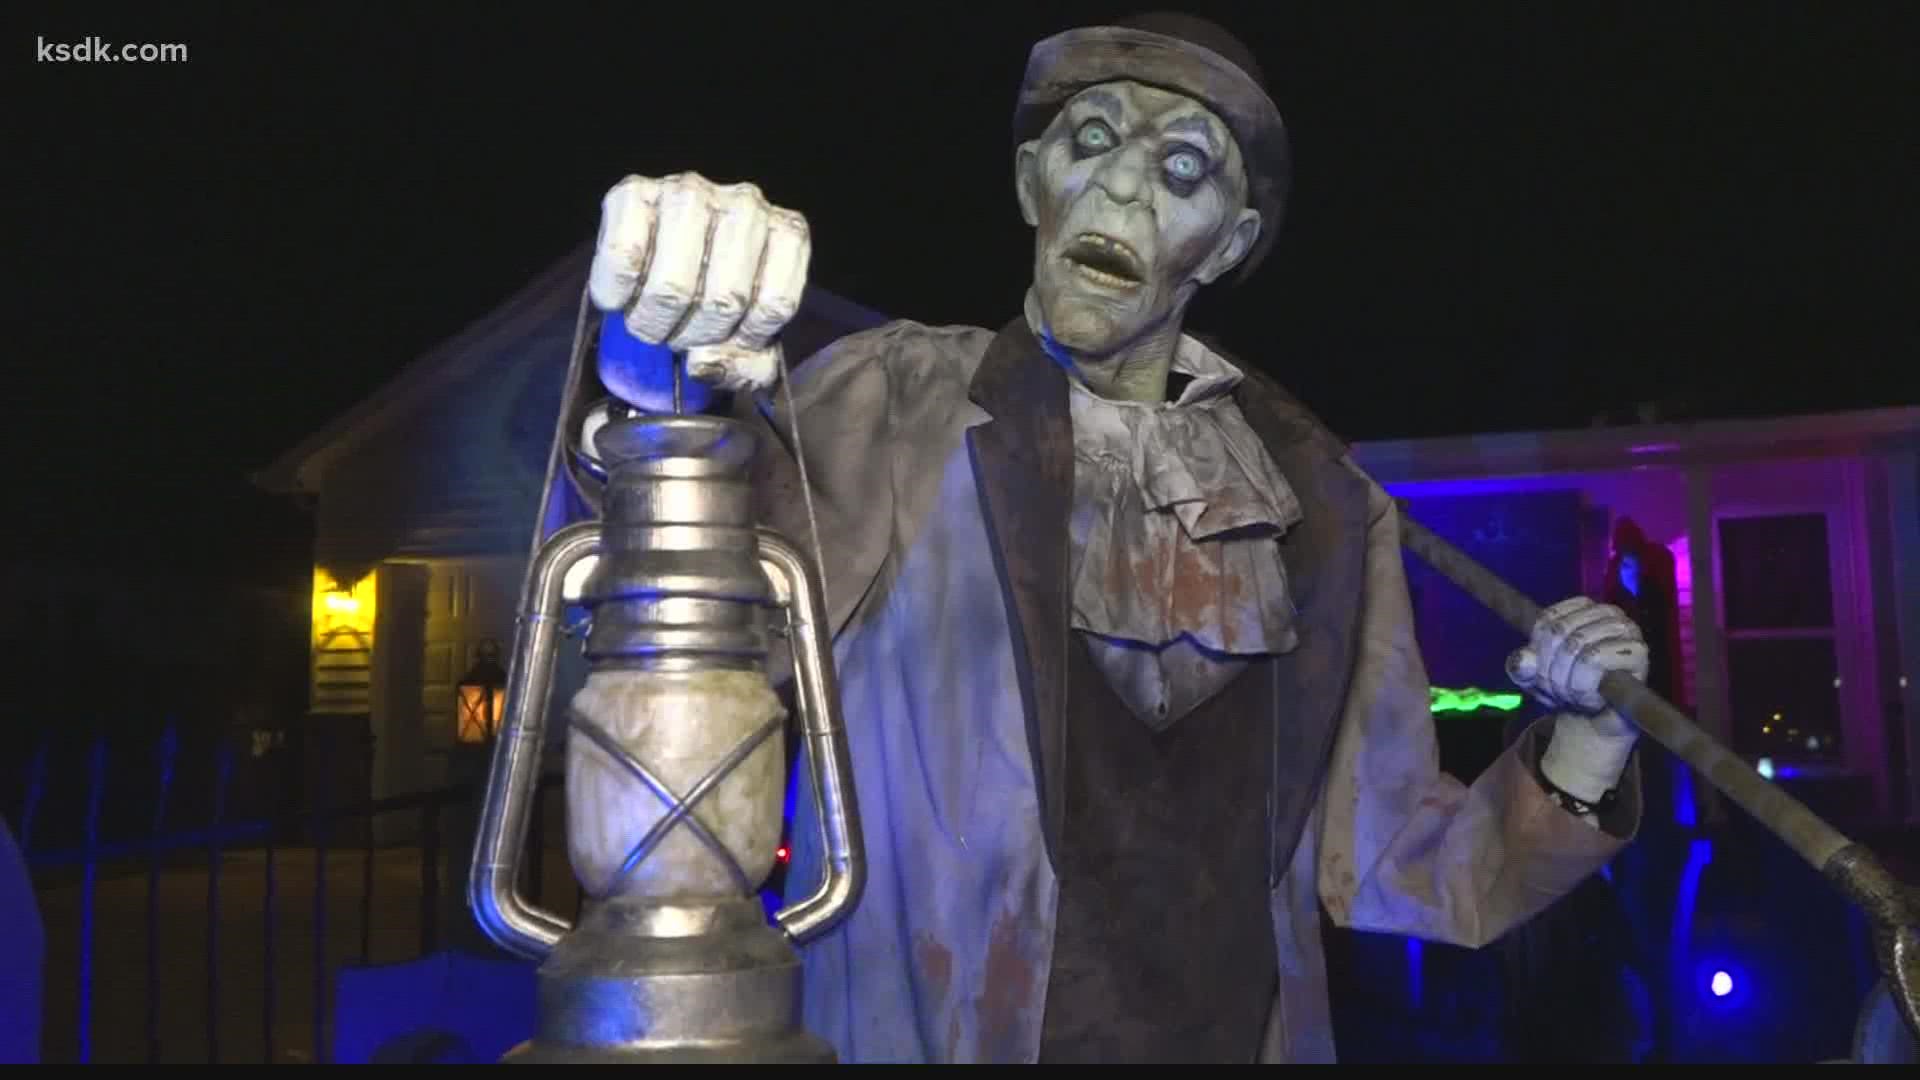 It's easily one of the spookiest places in St. Louis... welcome to "Halloween Town."